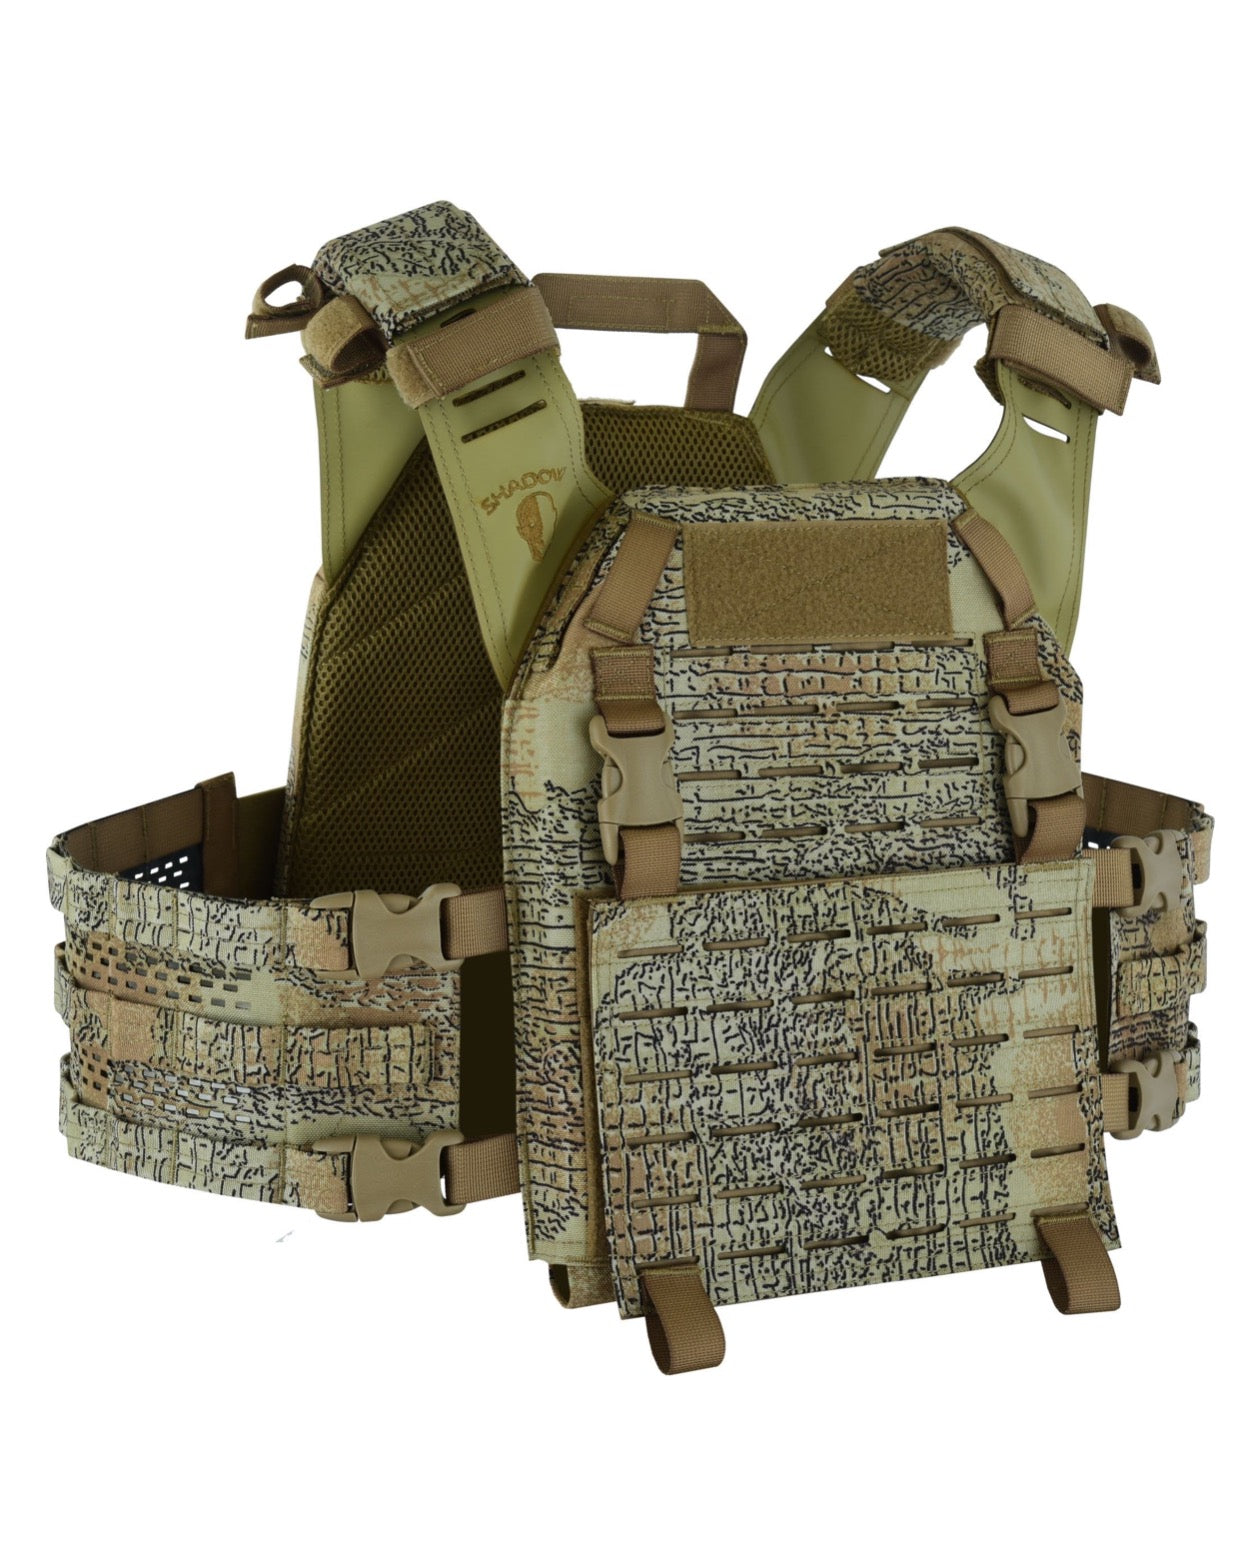 SHE - 154 "FPC" Falcon Plate Carrier